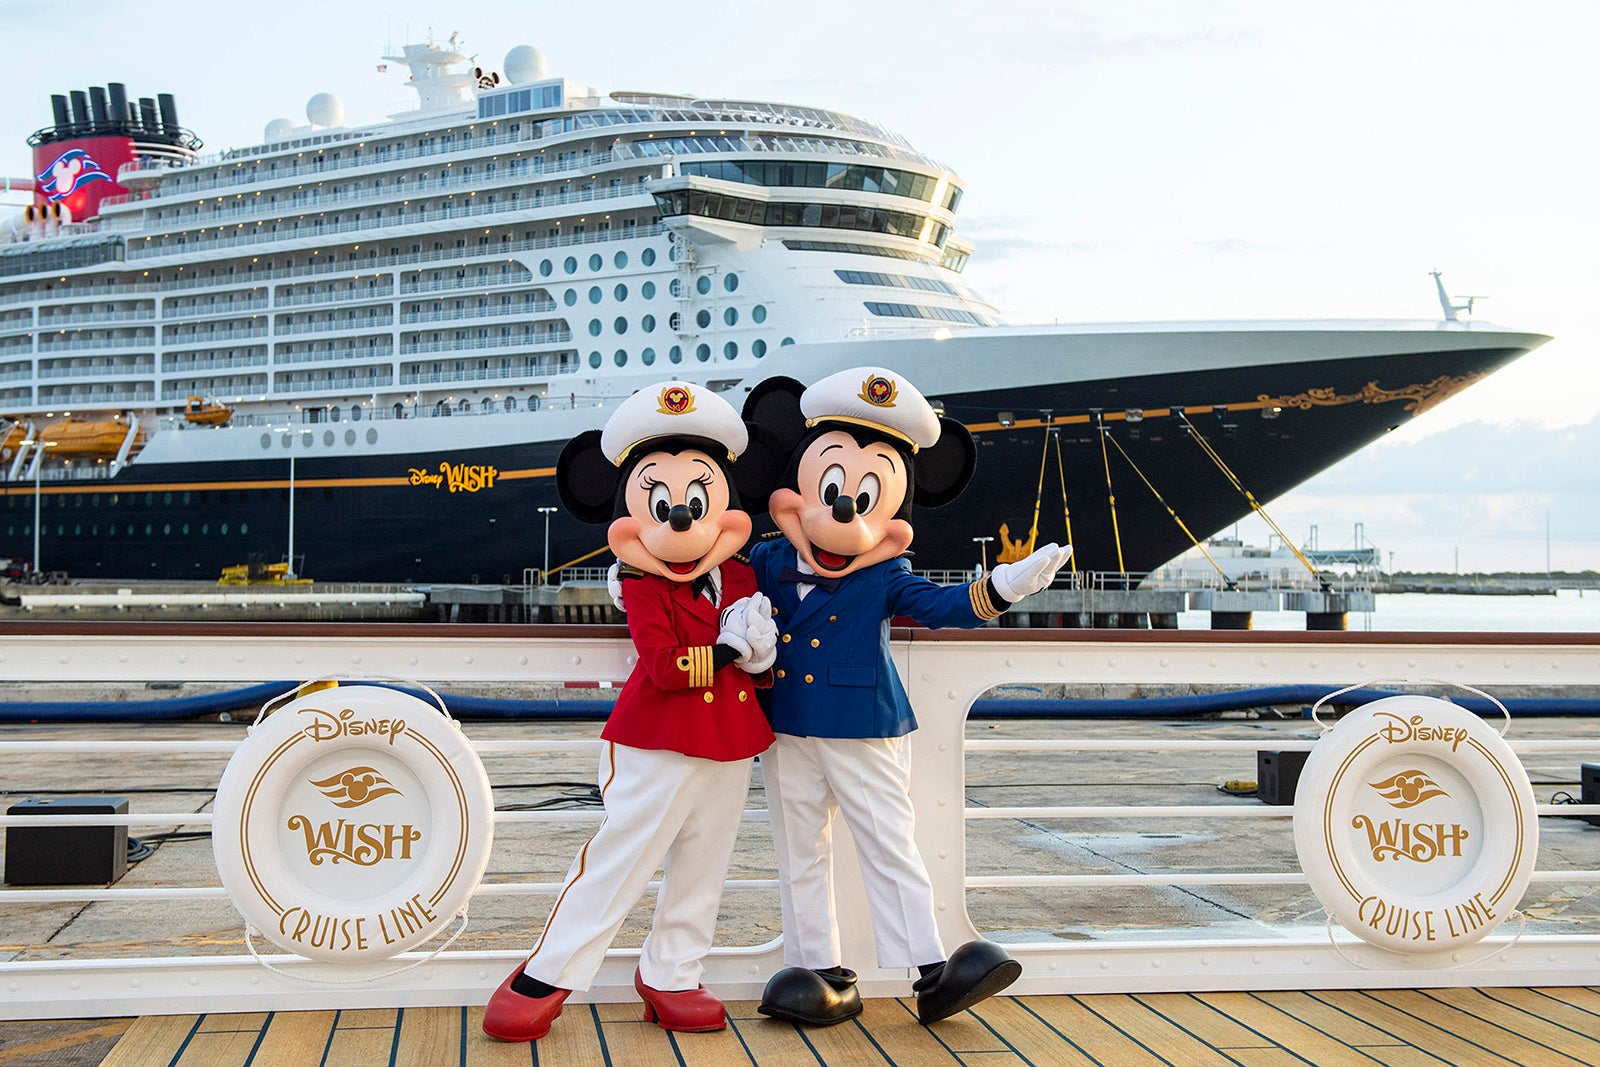 The Disney Wish will sail its inaugural season of three- and four-night cruises to Nassau, Bahamas, and Disney’s private island, Castaway Cay, from its new home port of Port Canaveral, Florida.